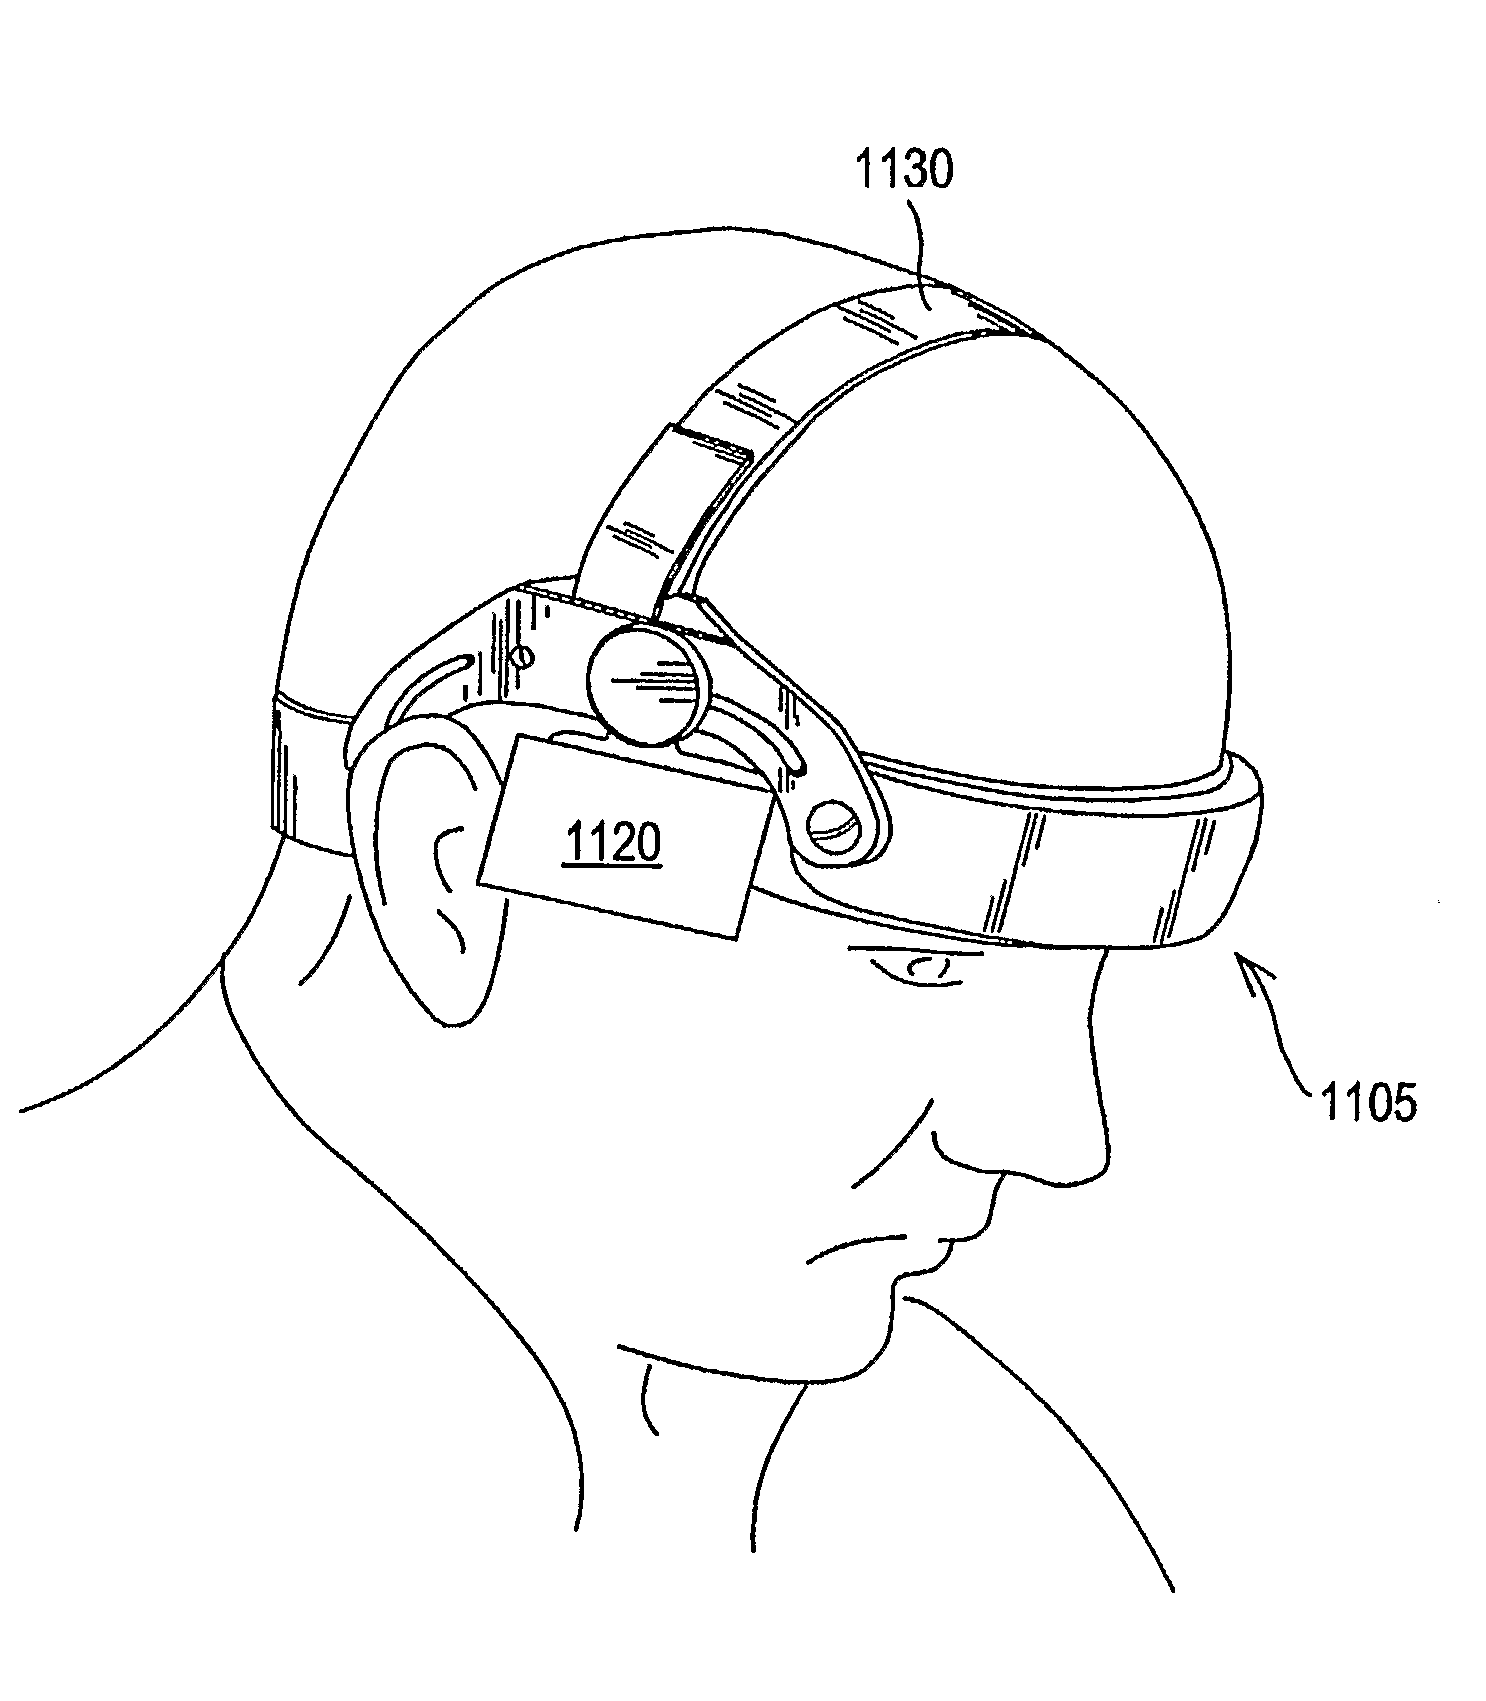 Ultrasound Apparatus and Method to Treat an Ischemic Stroke